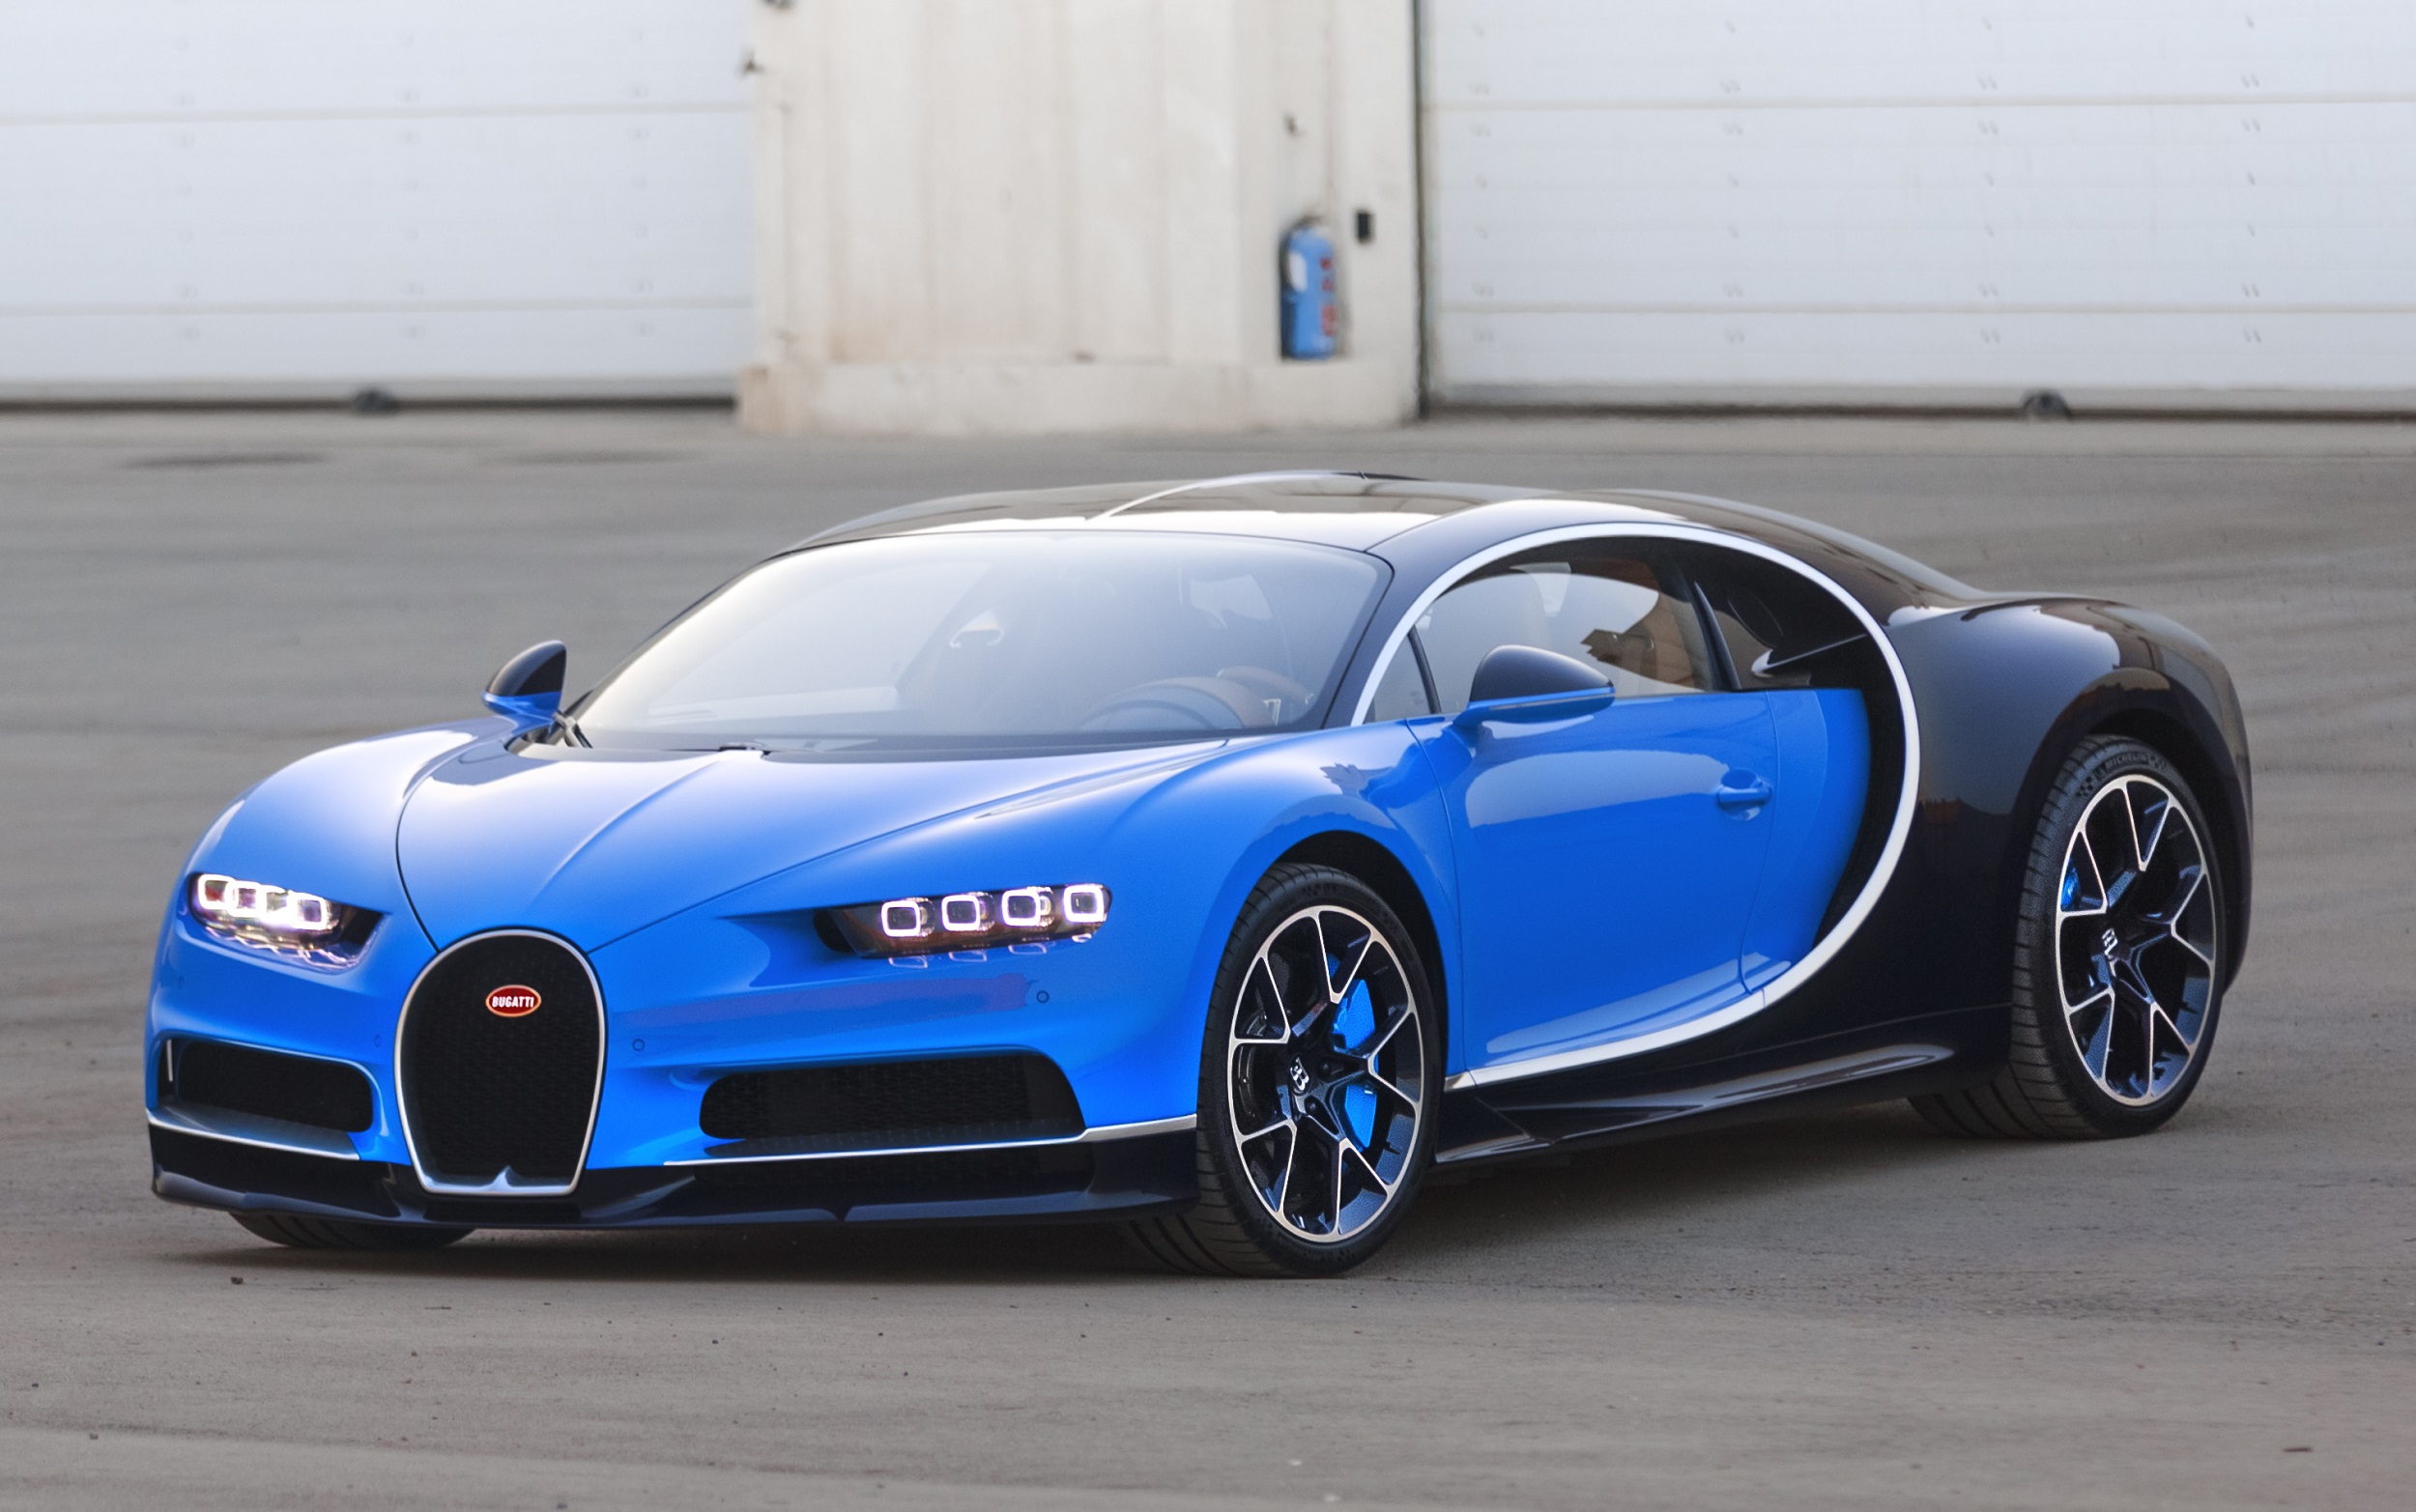 What’s The Most Expensive New Car In The World